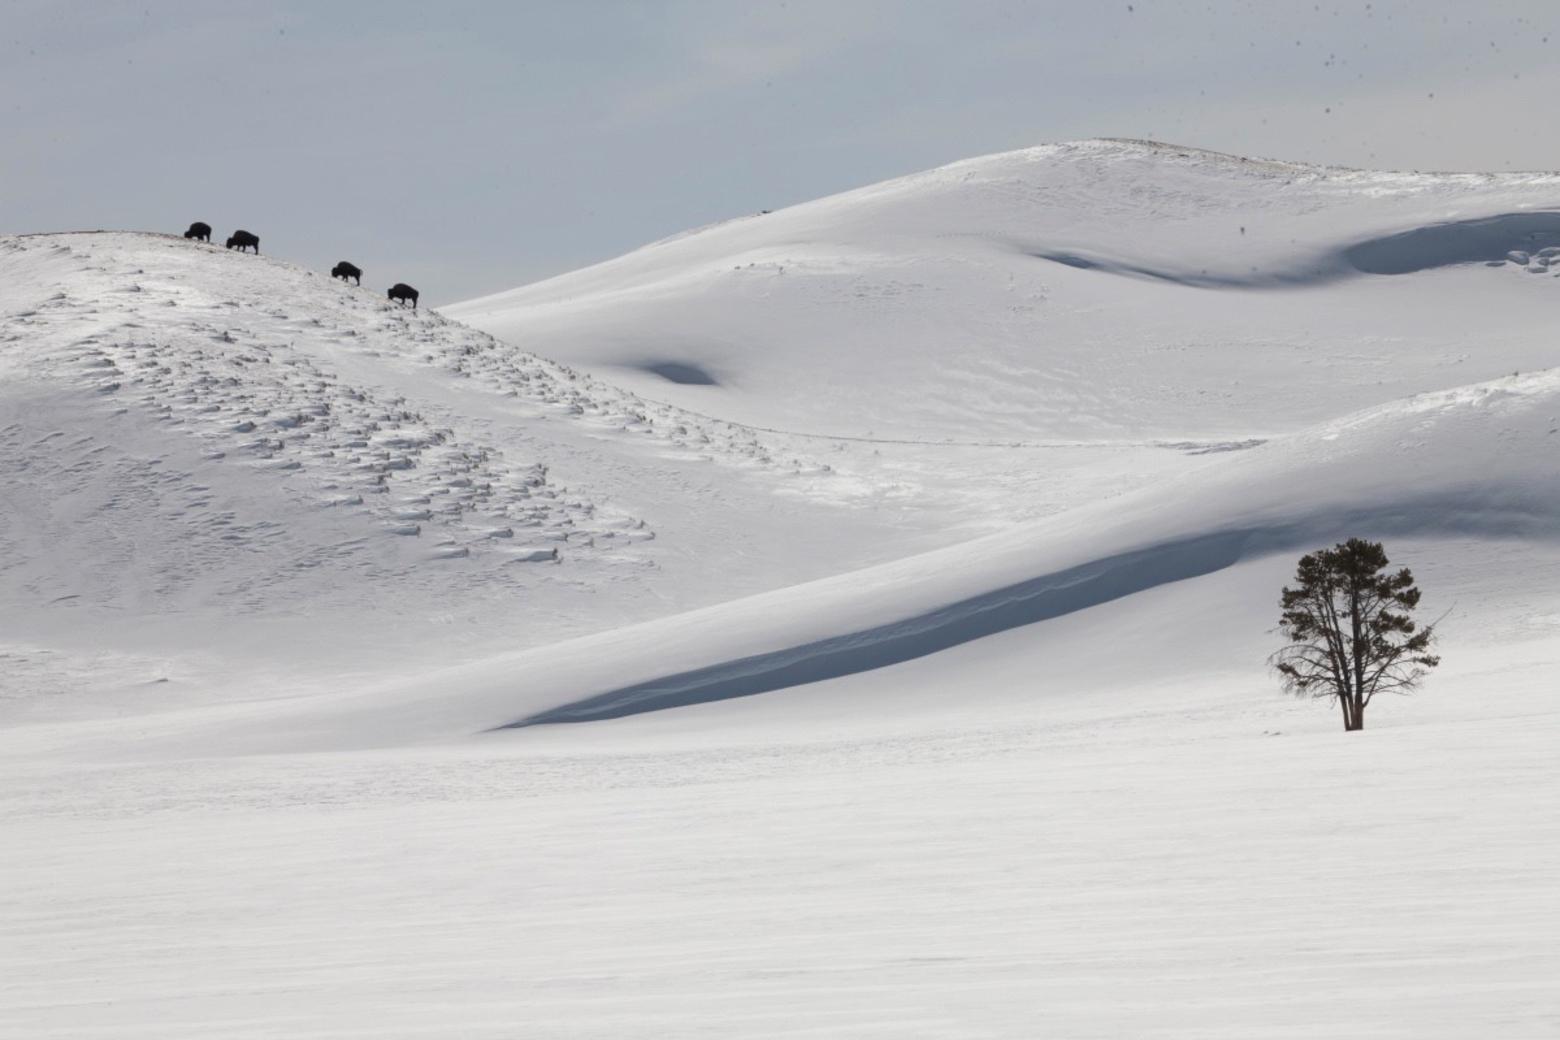 "Snow cornices resembling albino sand dunes grow on the lee side of the hills in the valley. The opposite windward side of the hills is mostly swept clean of snow allowing these bull bison to graze on the forage on the crest, poor as it is, but with a minimum expenditure of energy," Fuller writes. Photo by Steven Fuller